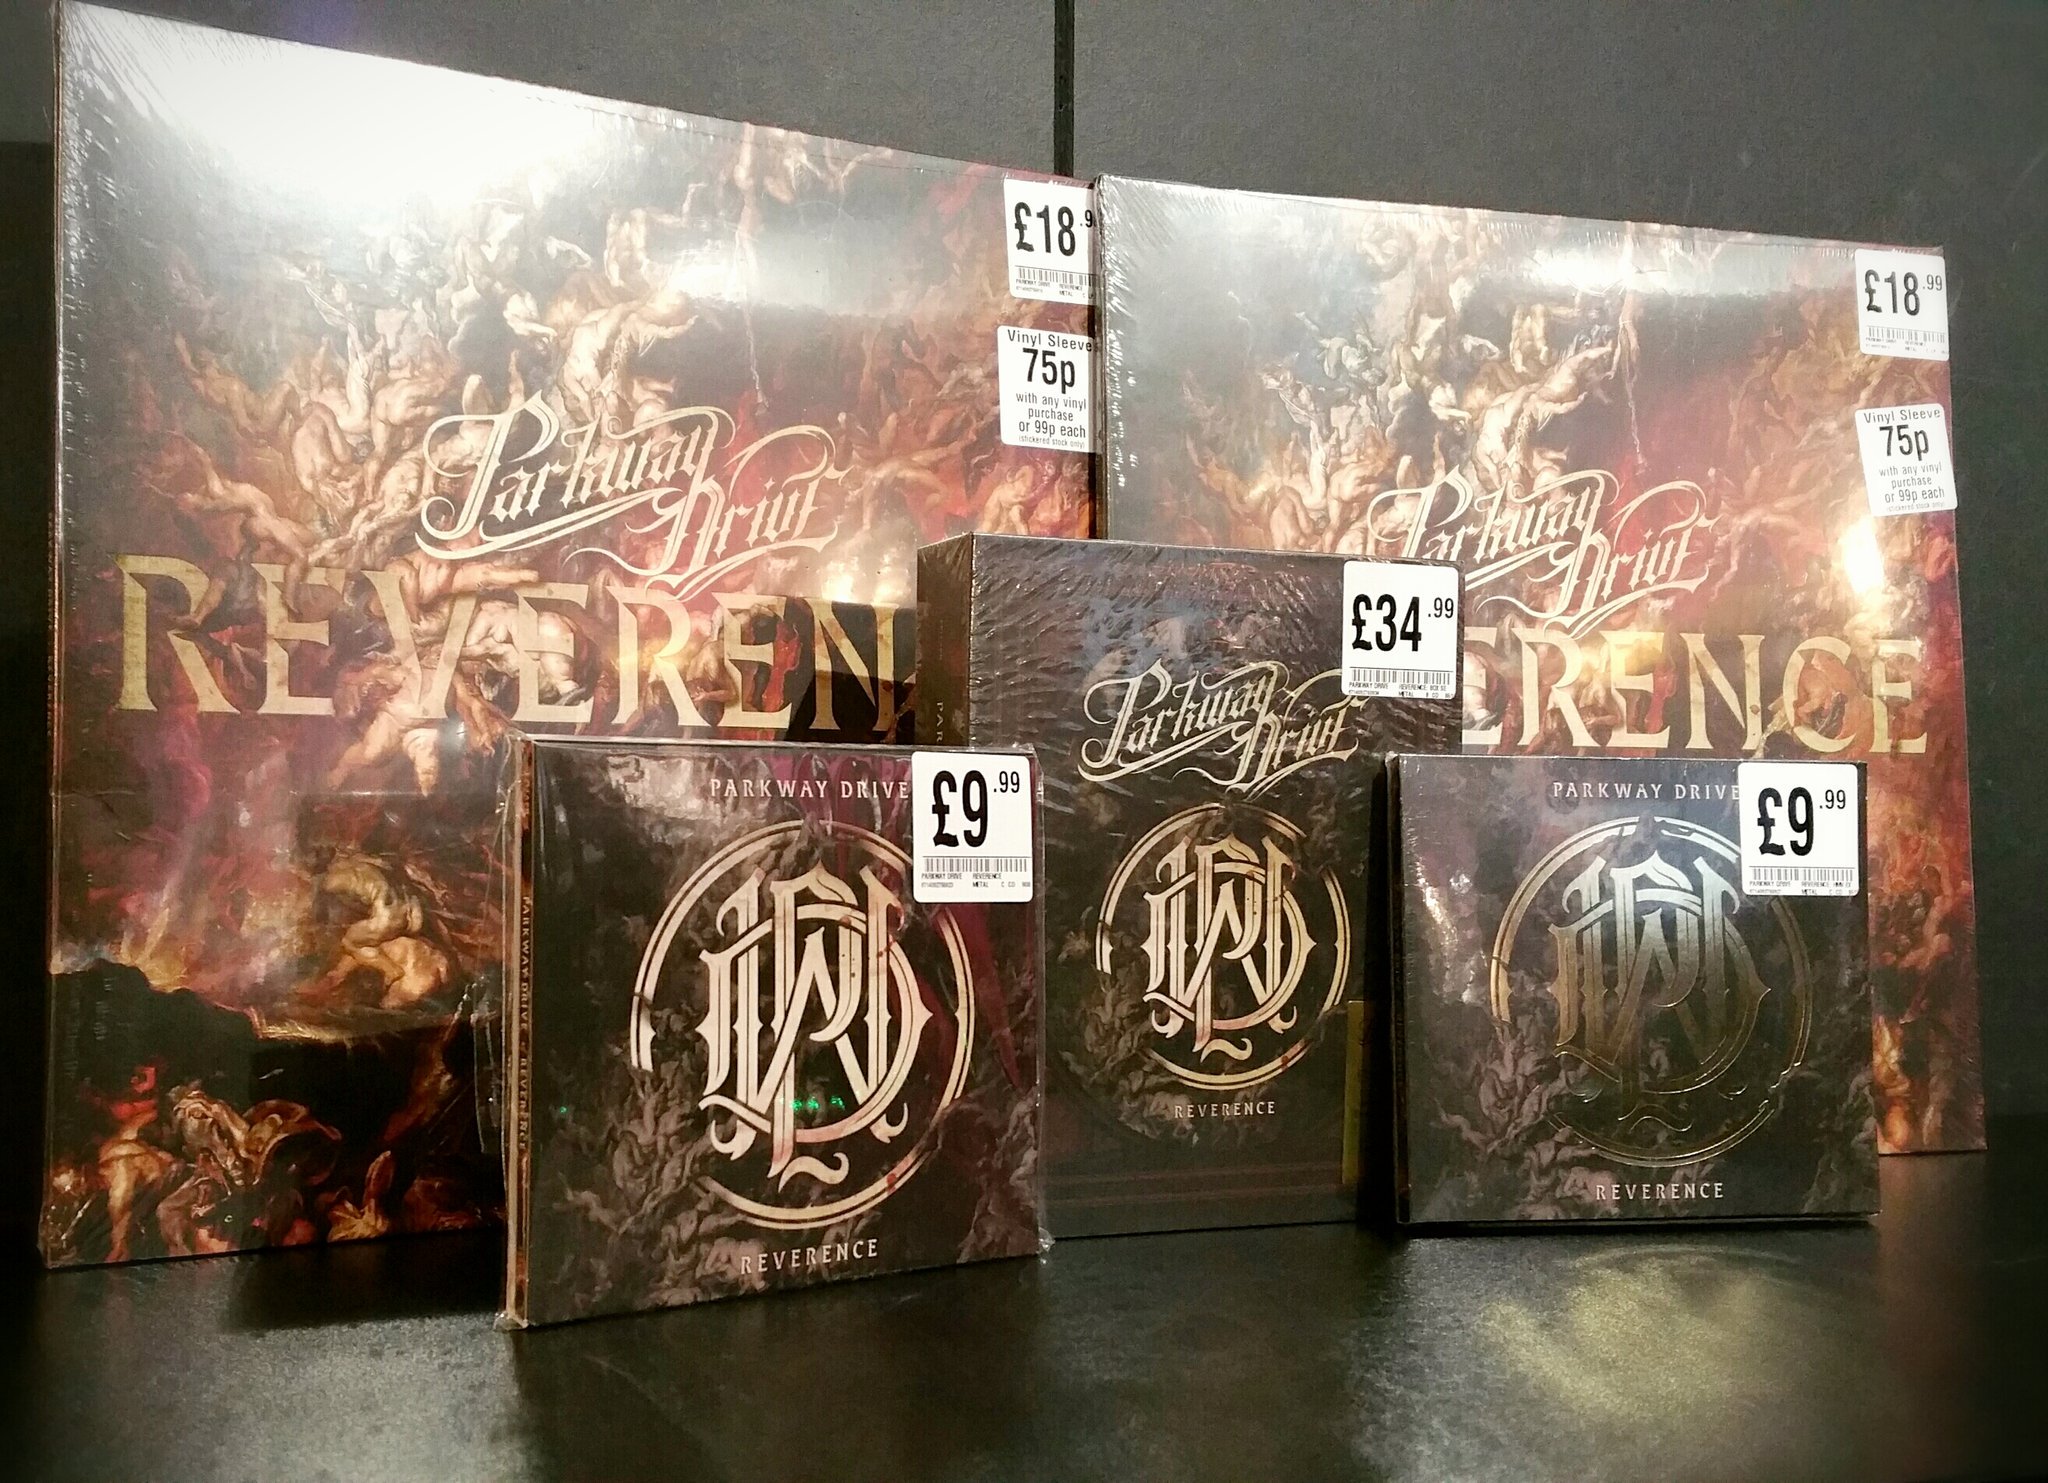 hmv Trafford Centre on Twitter: "Reverence by Parkway Drive. Available on edition coloured vinyl, CD boxset and #hmvexclusive CD. https://t.co/MUKrrvCwGD" / Twitter